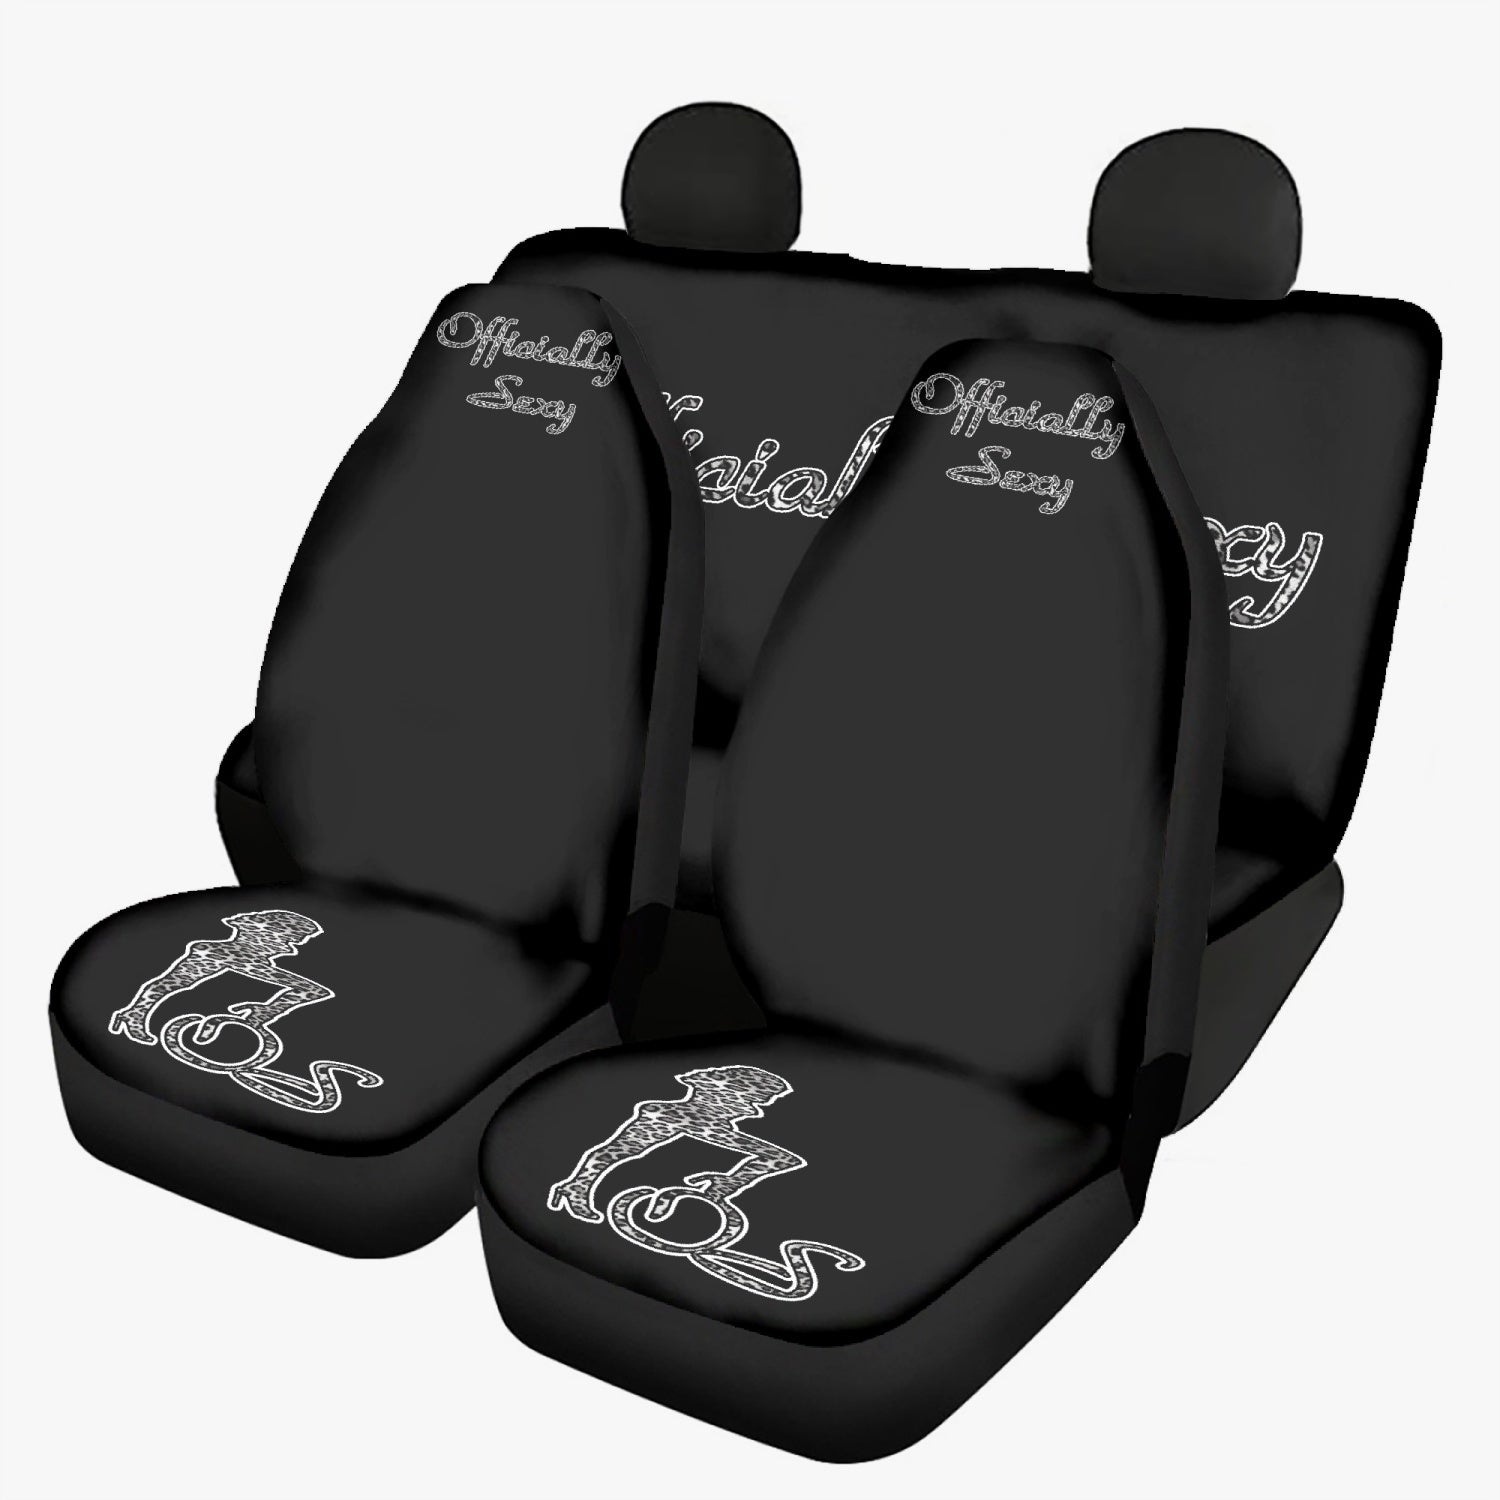 Officially Sexy Snow Leopard Print Collection Black Microfiber Car Seat Covers - 3Pcs